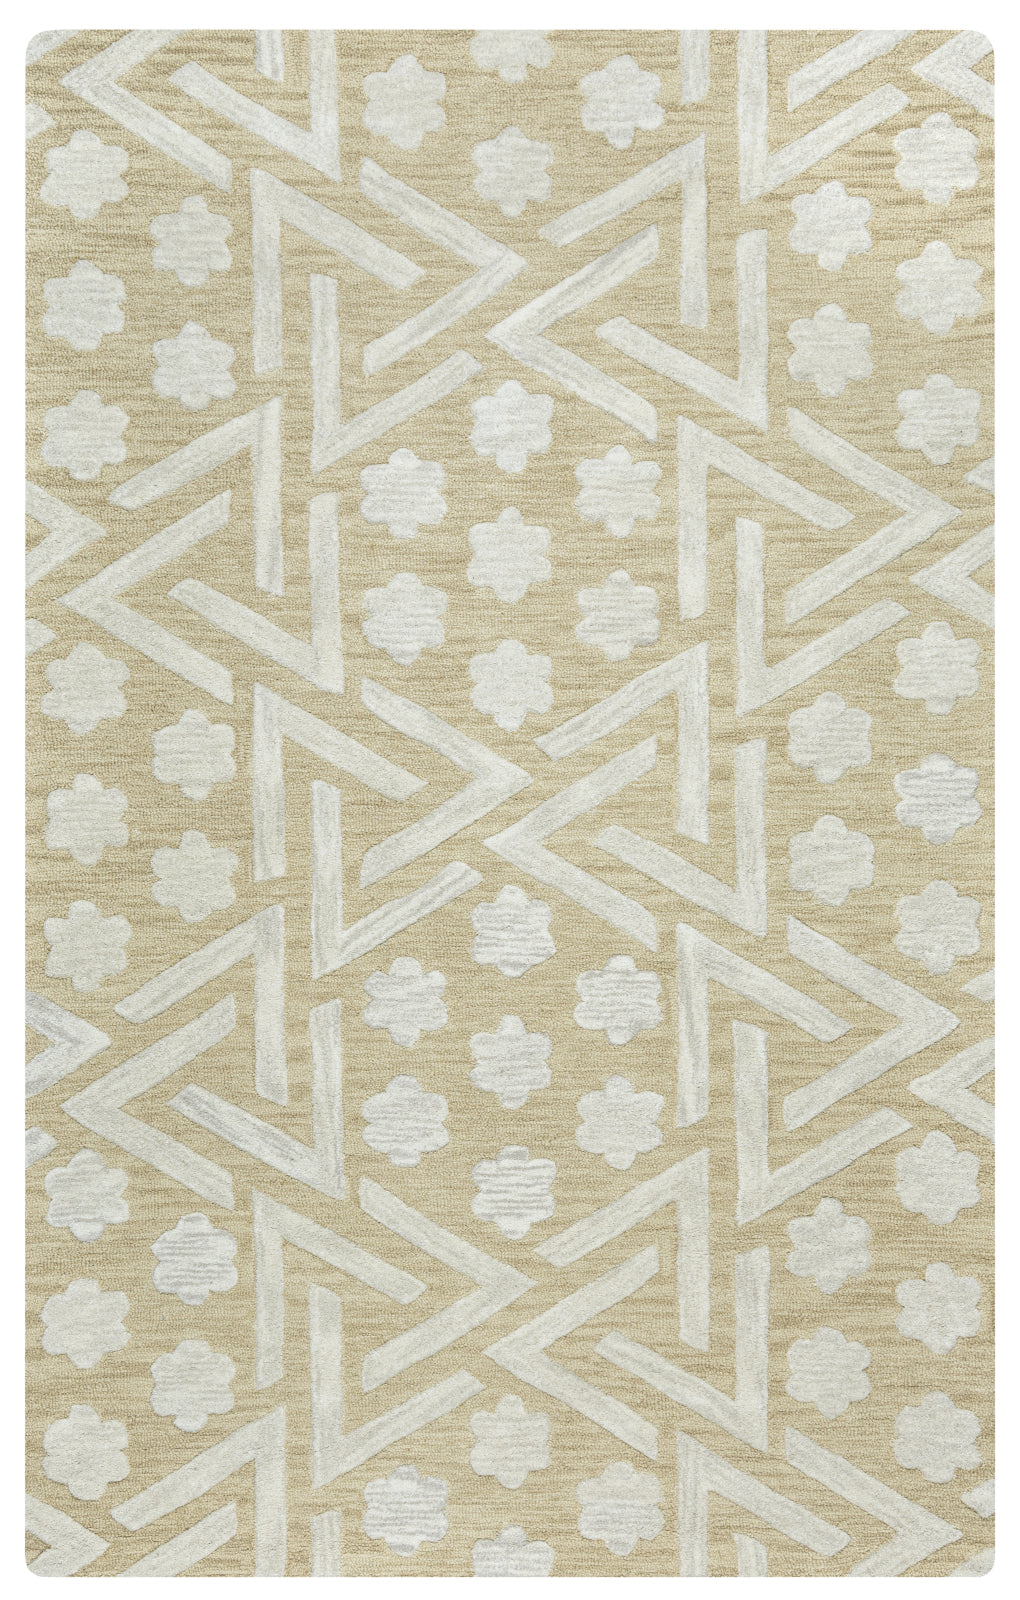 Rizzy Caterine CE9485 Beige Area Rug main image